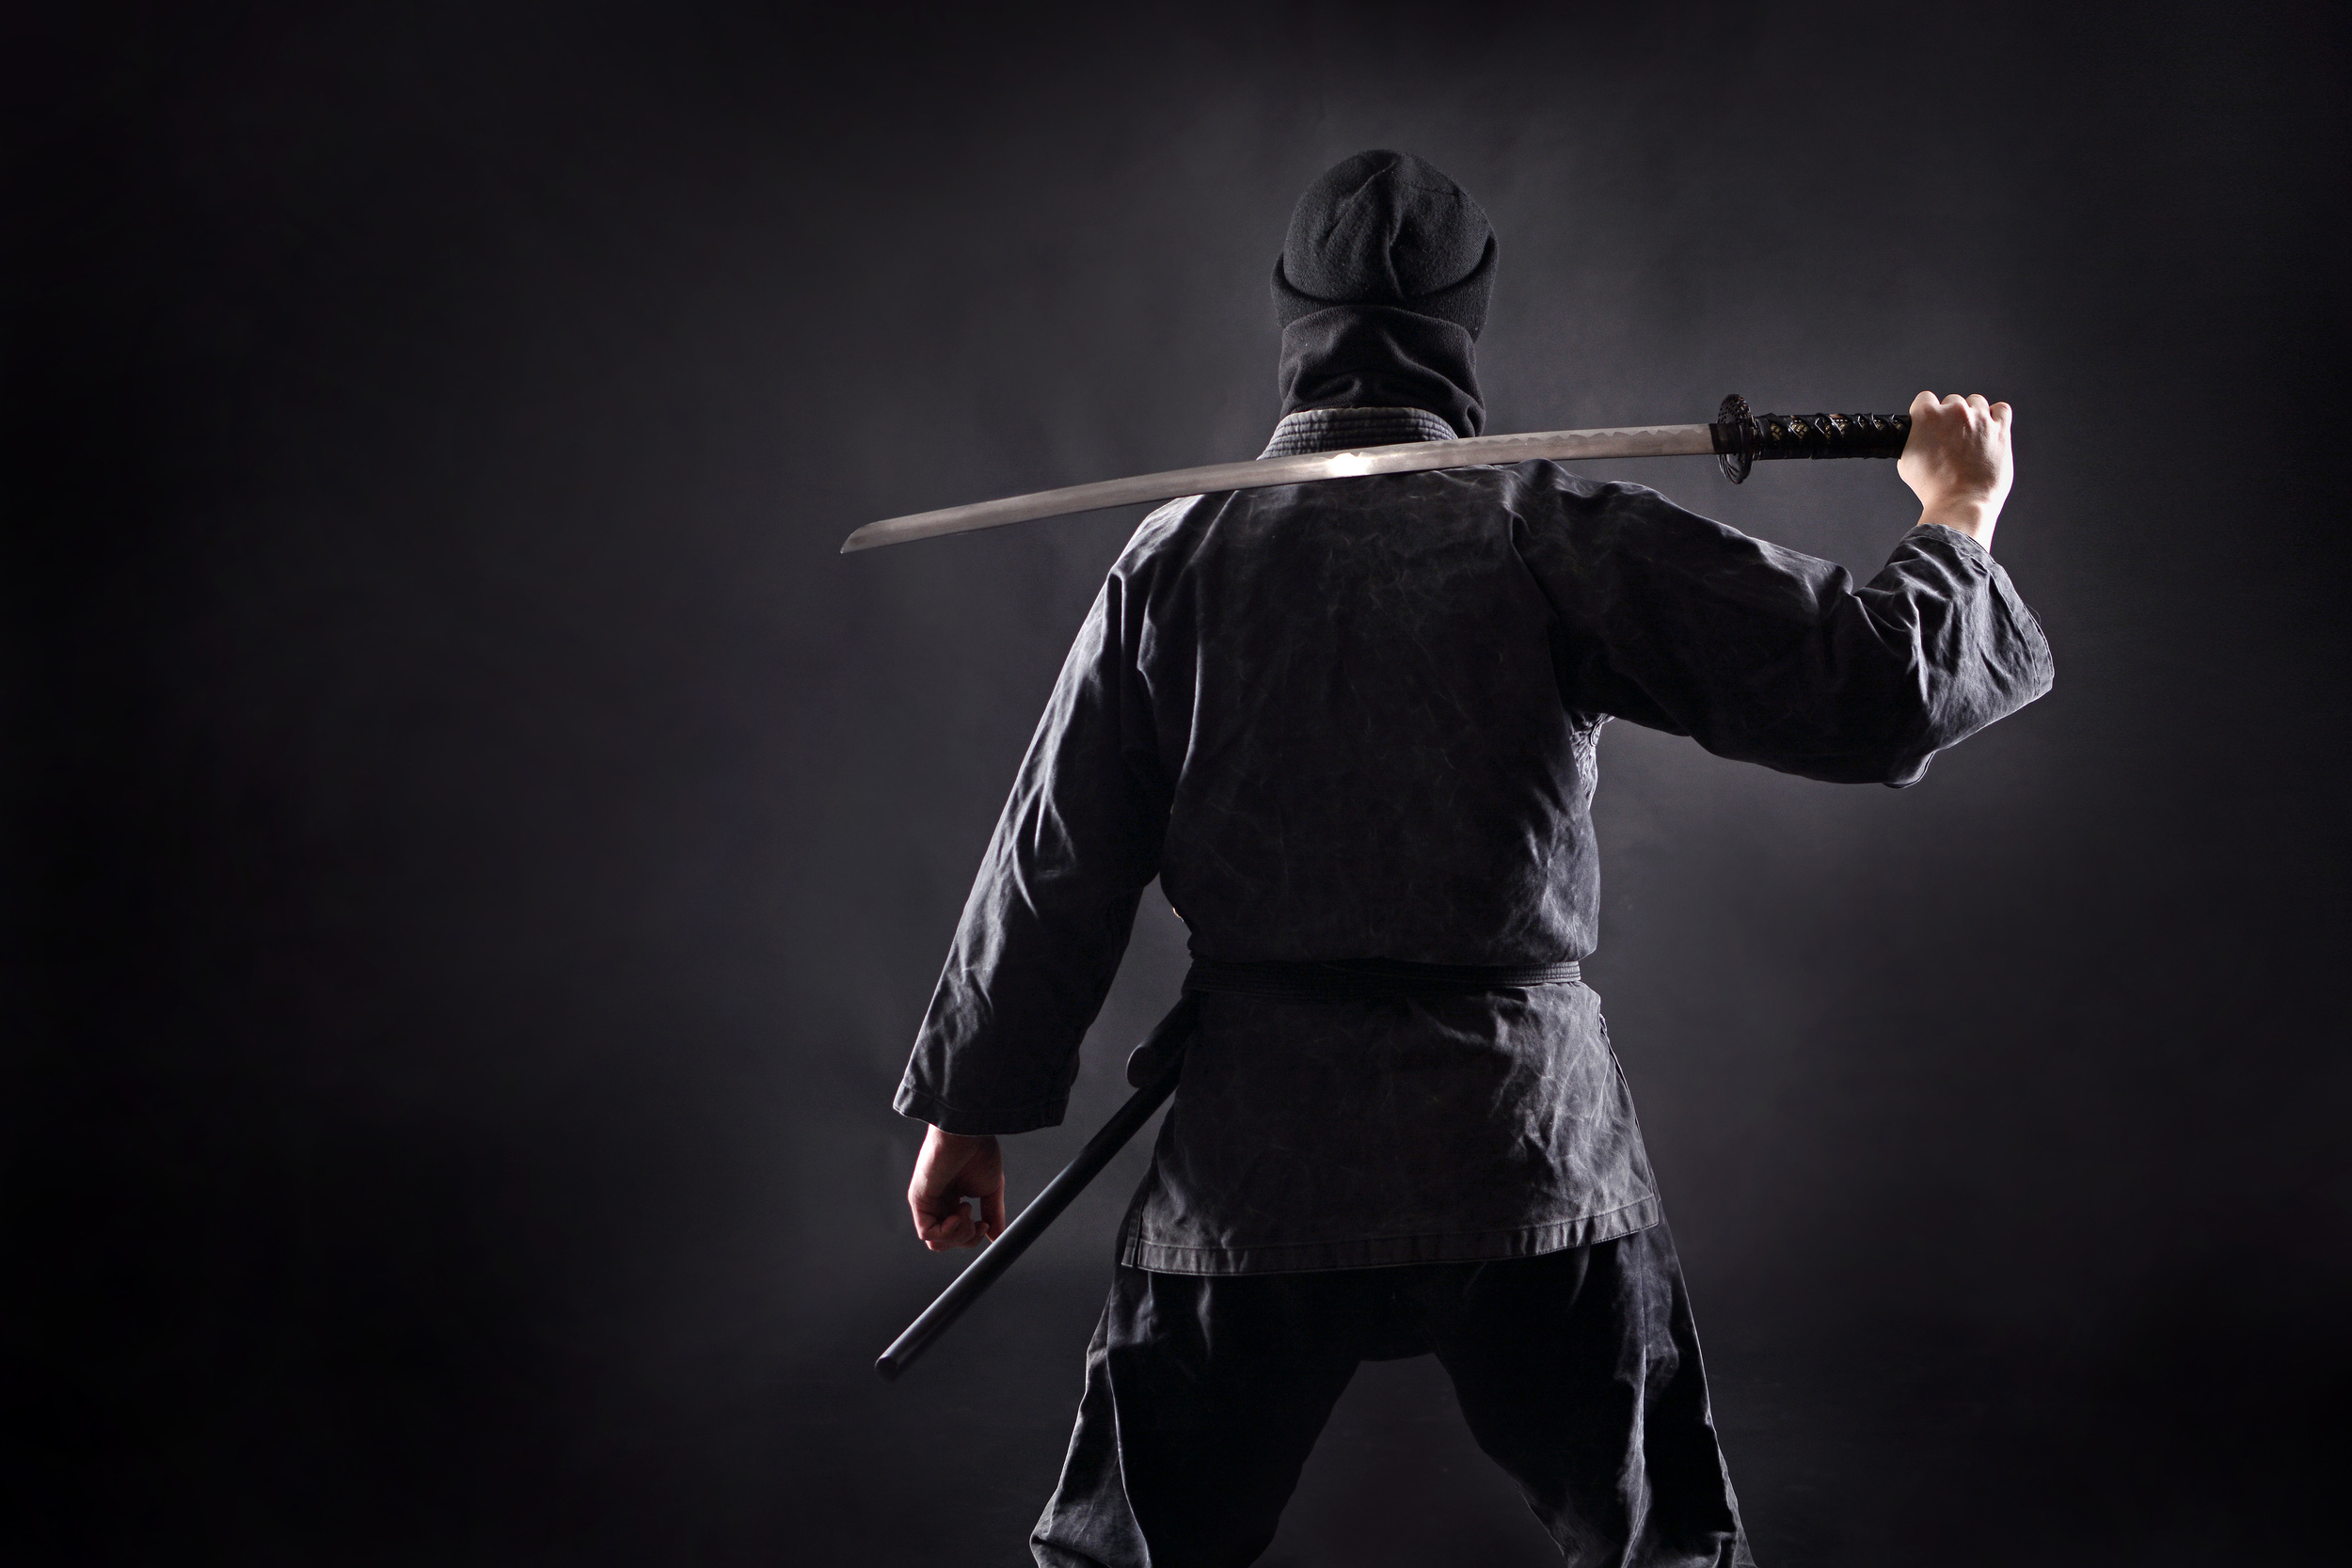 <p>In Japan, “ninjas” were historically very skilled mercenary agents. The term is two words put together; “nin” for endurance and “ja” for a person. Now, the term is used worldwide to describe quick and athletically gifted individuals. </p><p><a href='https://www.msn.com/en-us/community/channel/vid-cj9pqbr0vn9in2b6ddcd8sfgpfq6x6utp44fssrv6mc2gtybw0us'>Follow us on MSN to see more of our exclusive lifestyle content.</a></p>